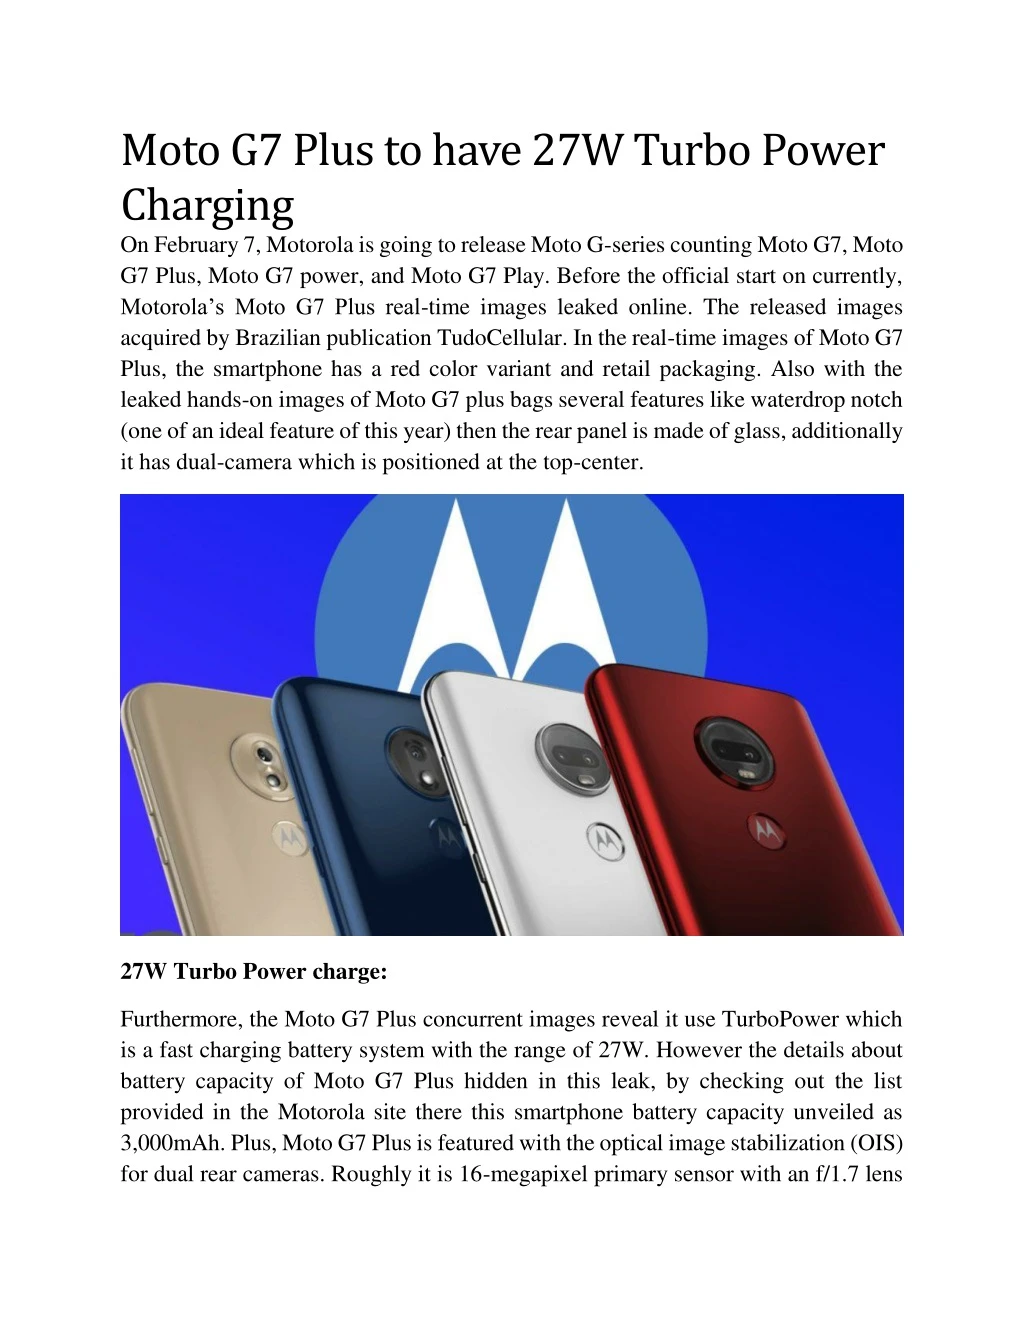 moto g7 plus to have 27w turbo power charging